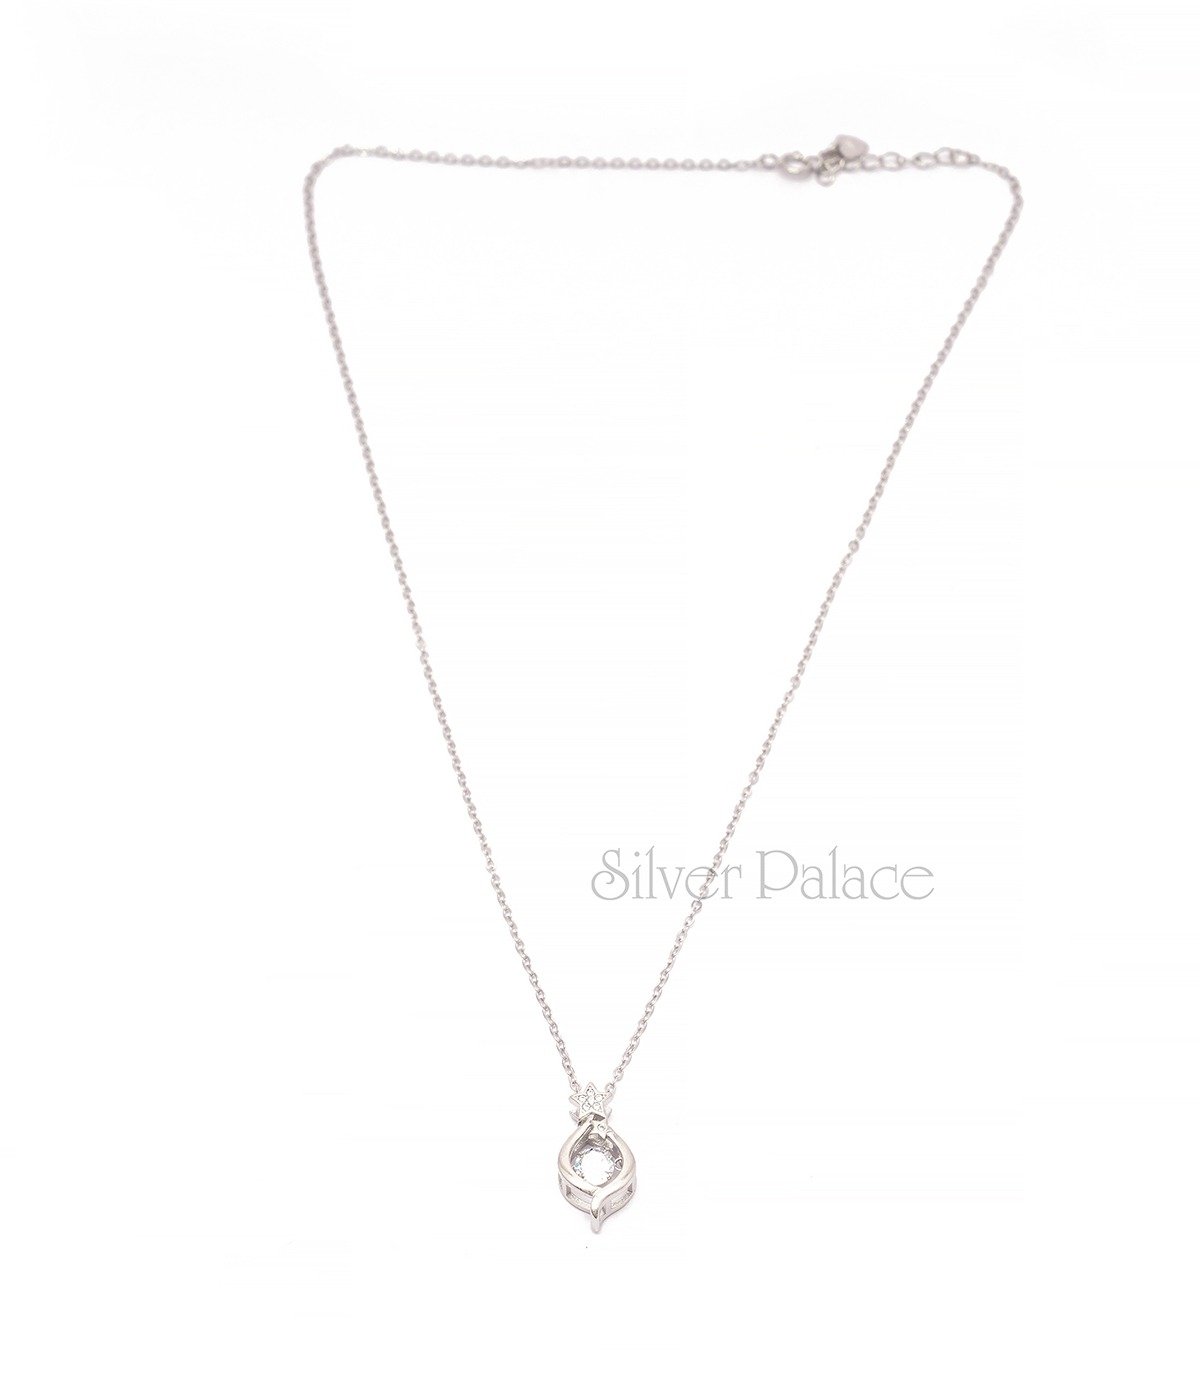 92.5 STERLING SILVER TINY STAR WITH LEAF PENDANT CHAIN FOR SCHOOL LW